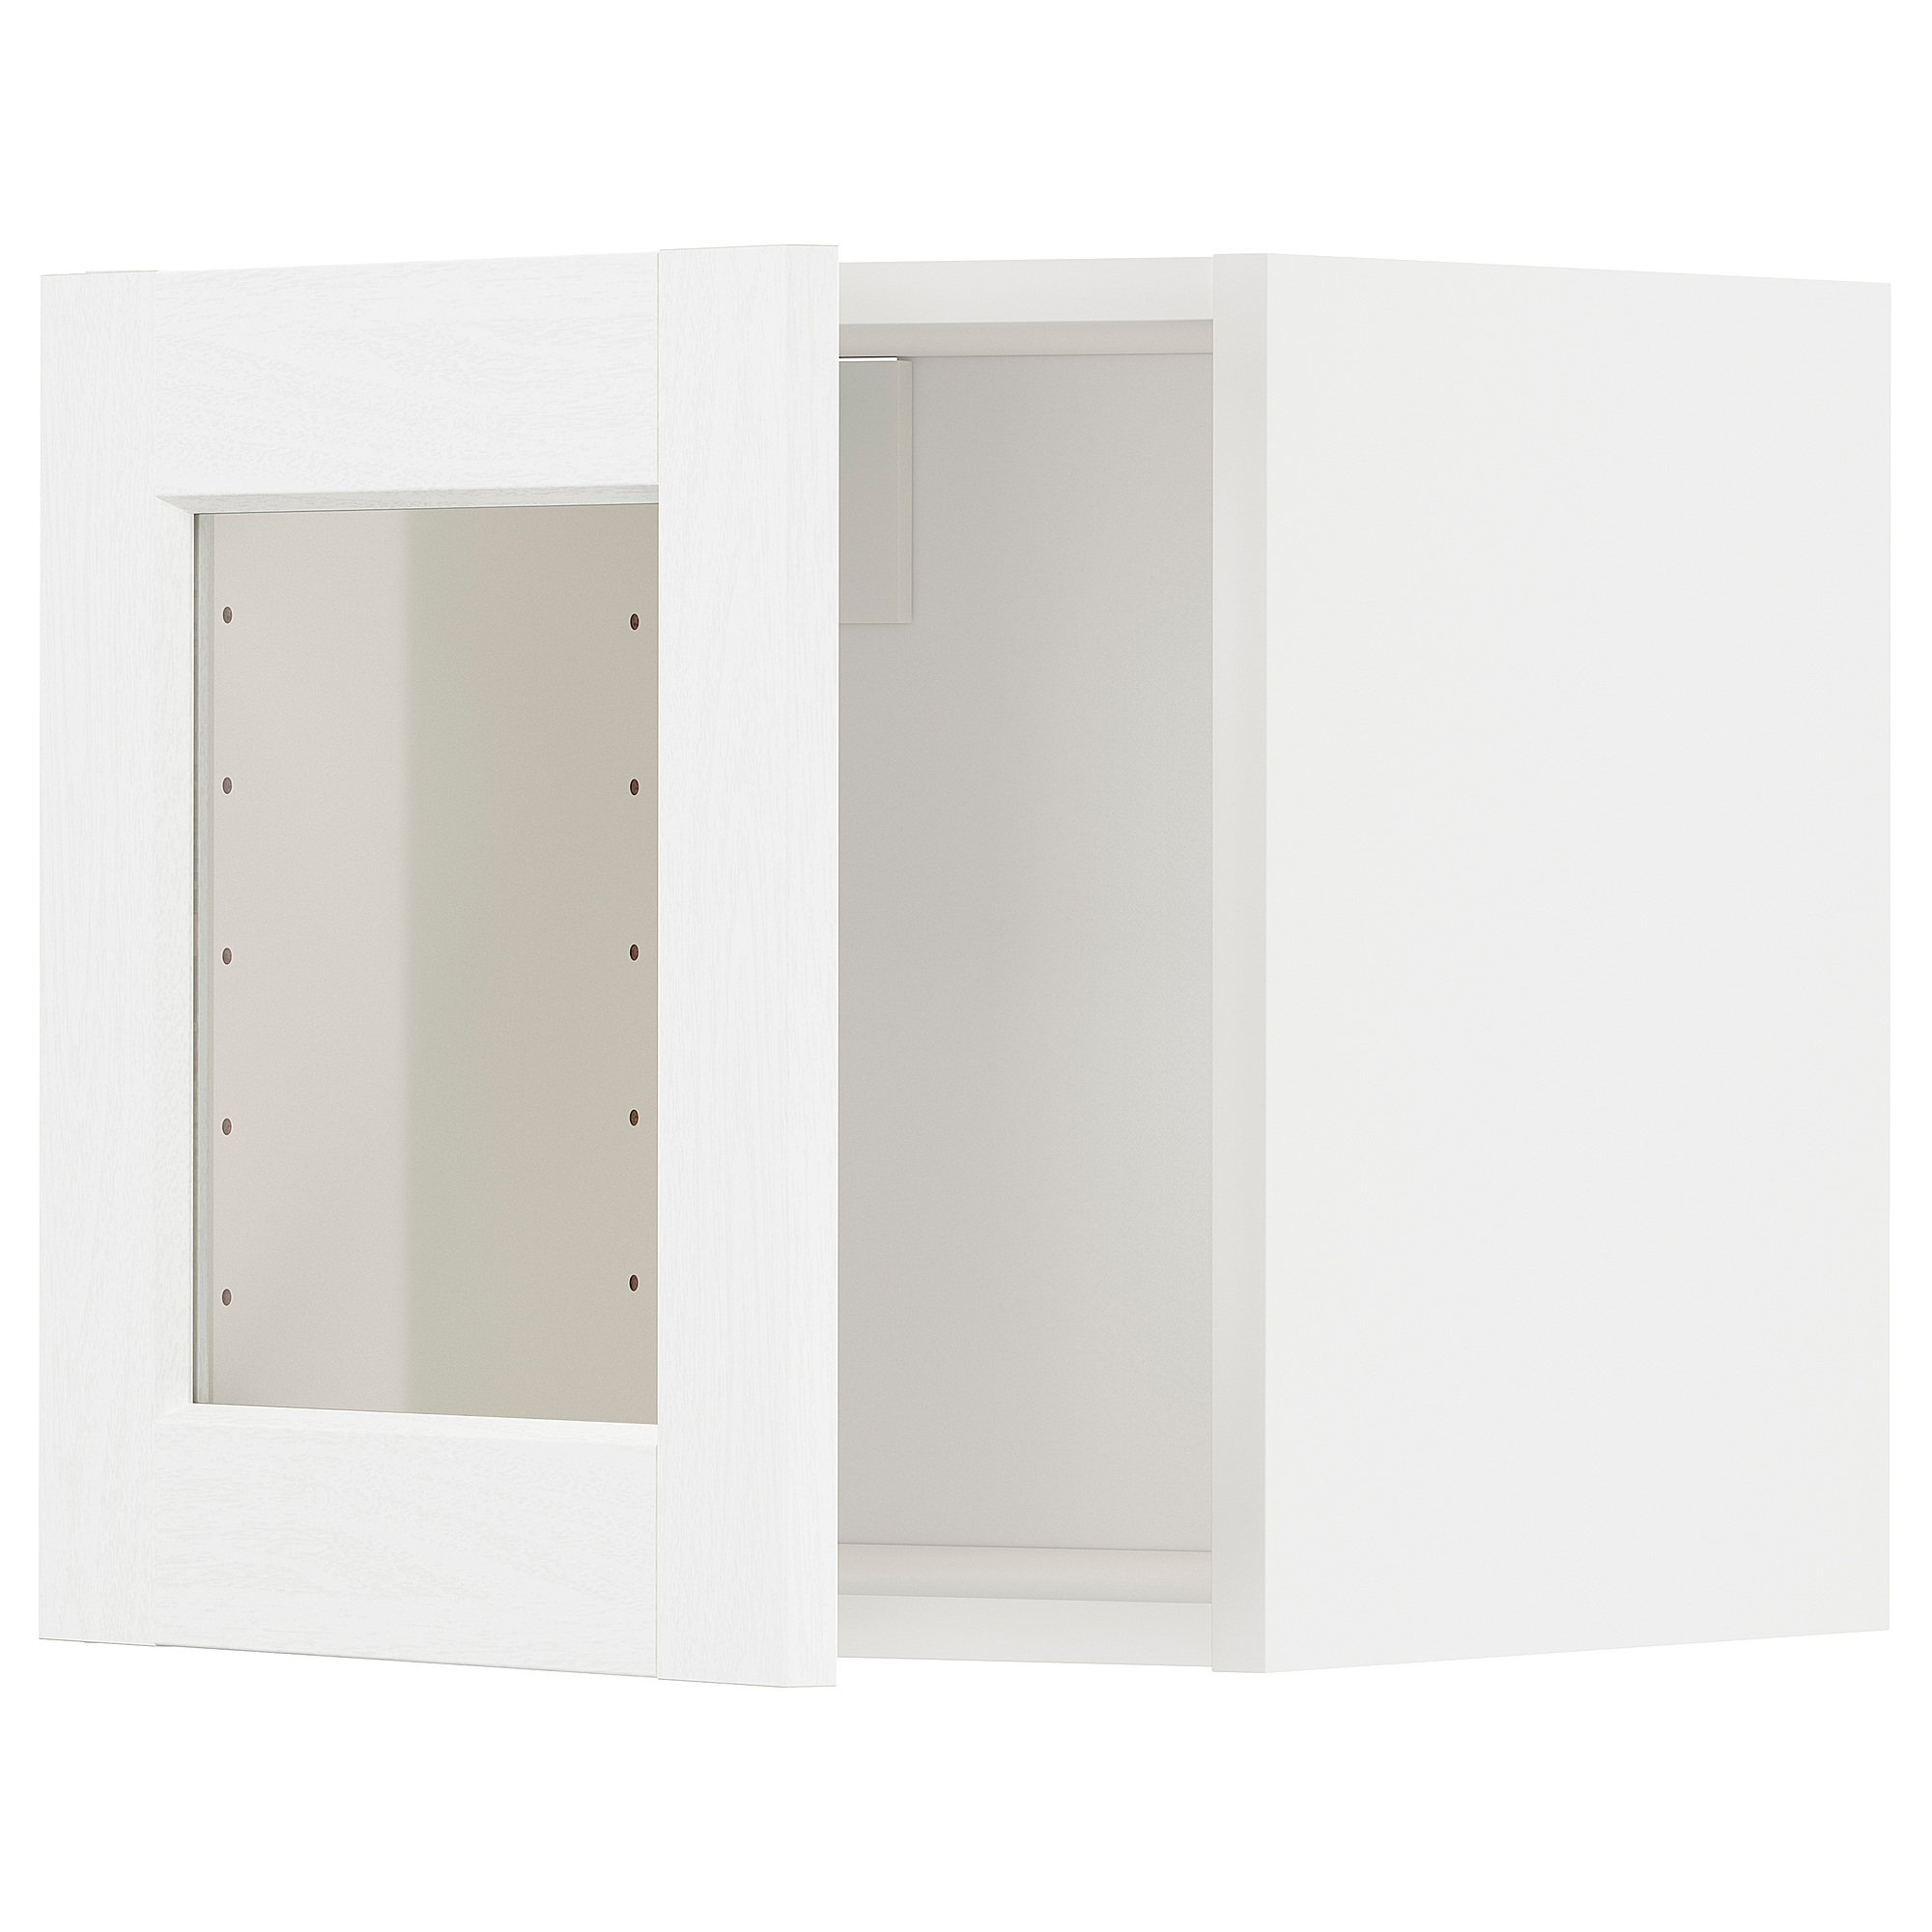 METOD wall cabinet with glass door